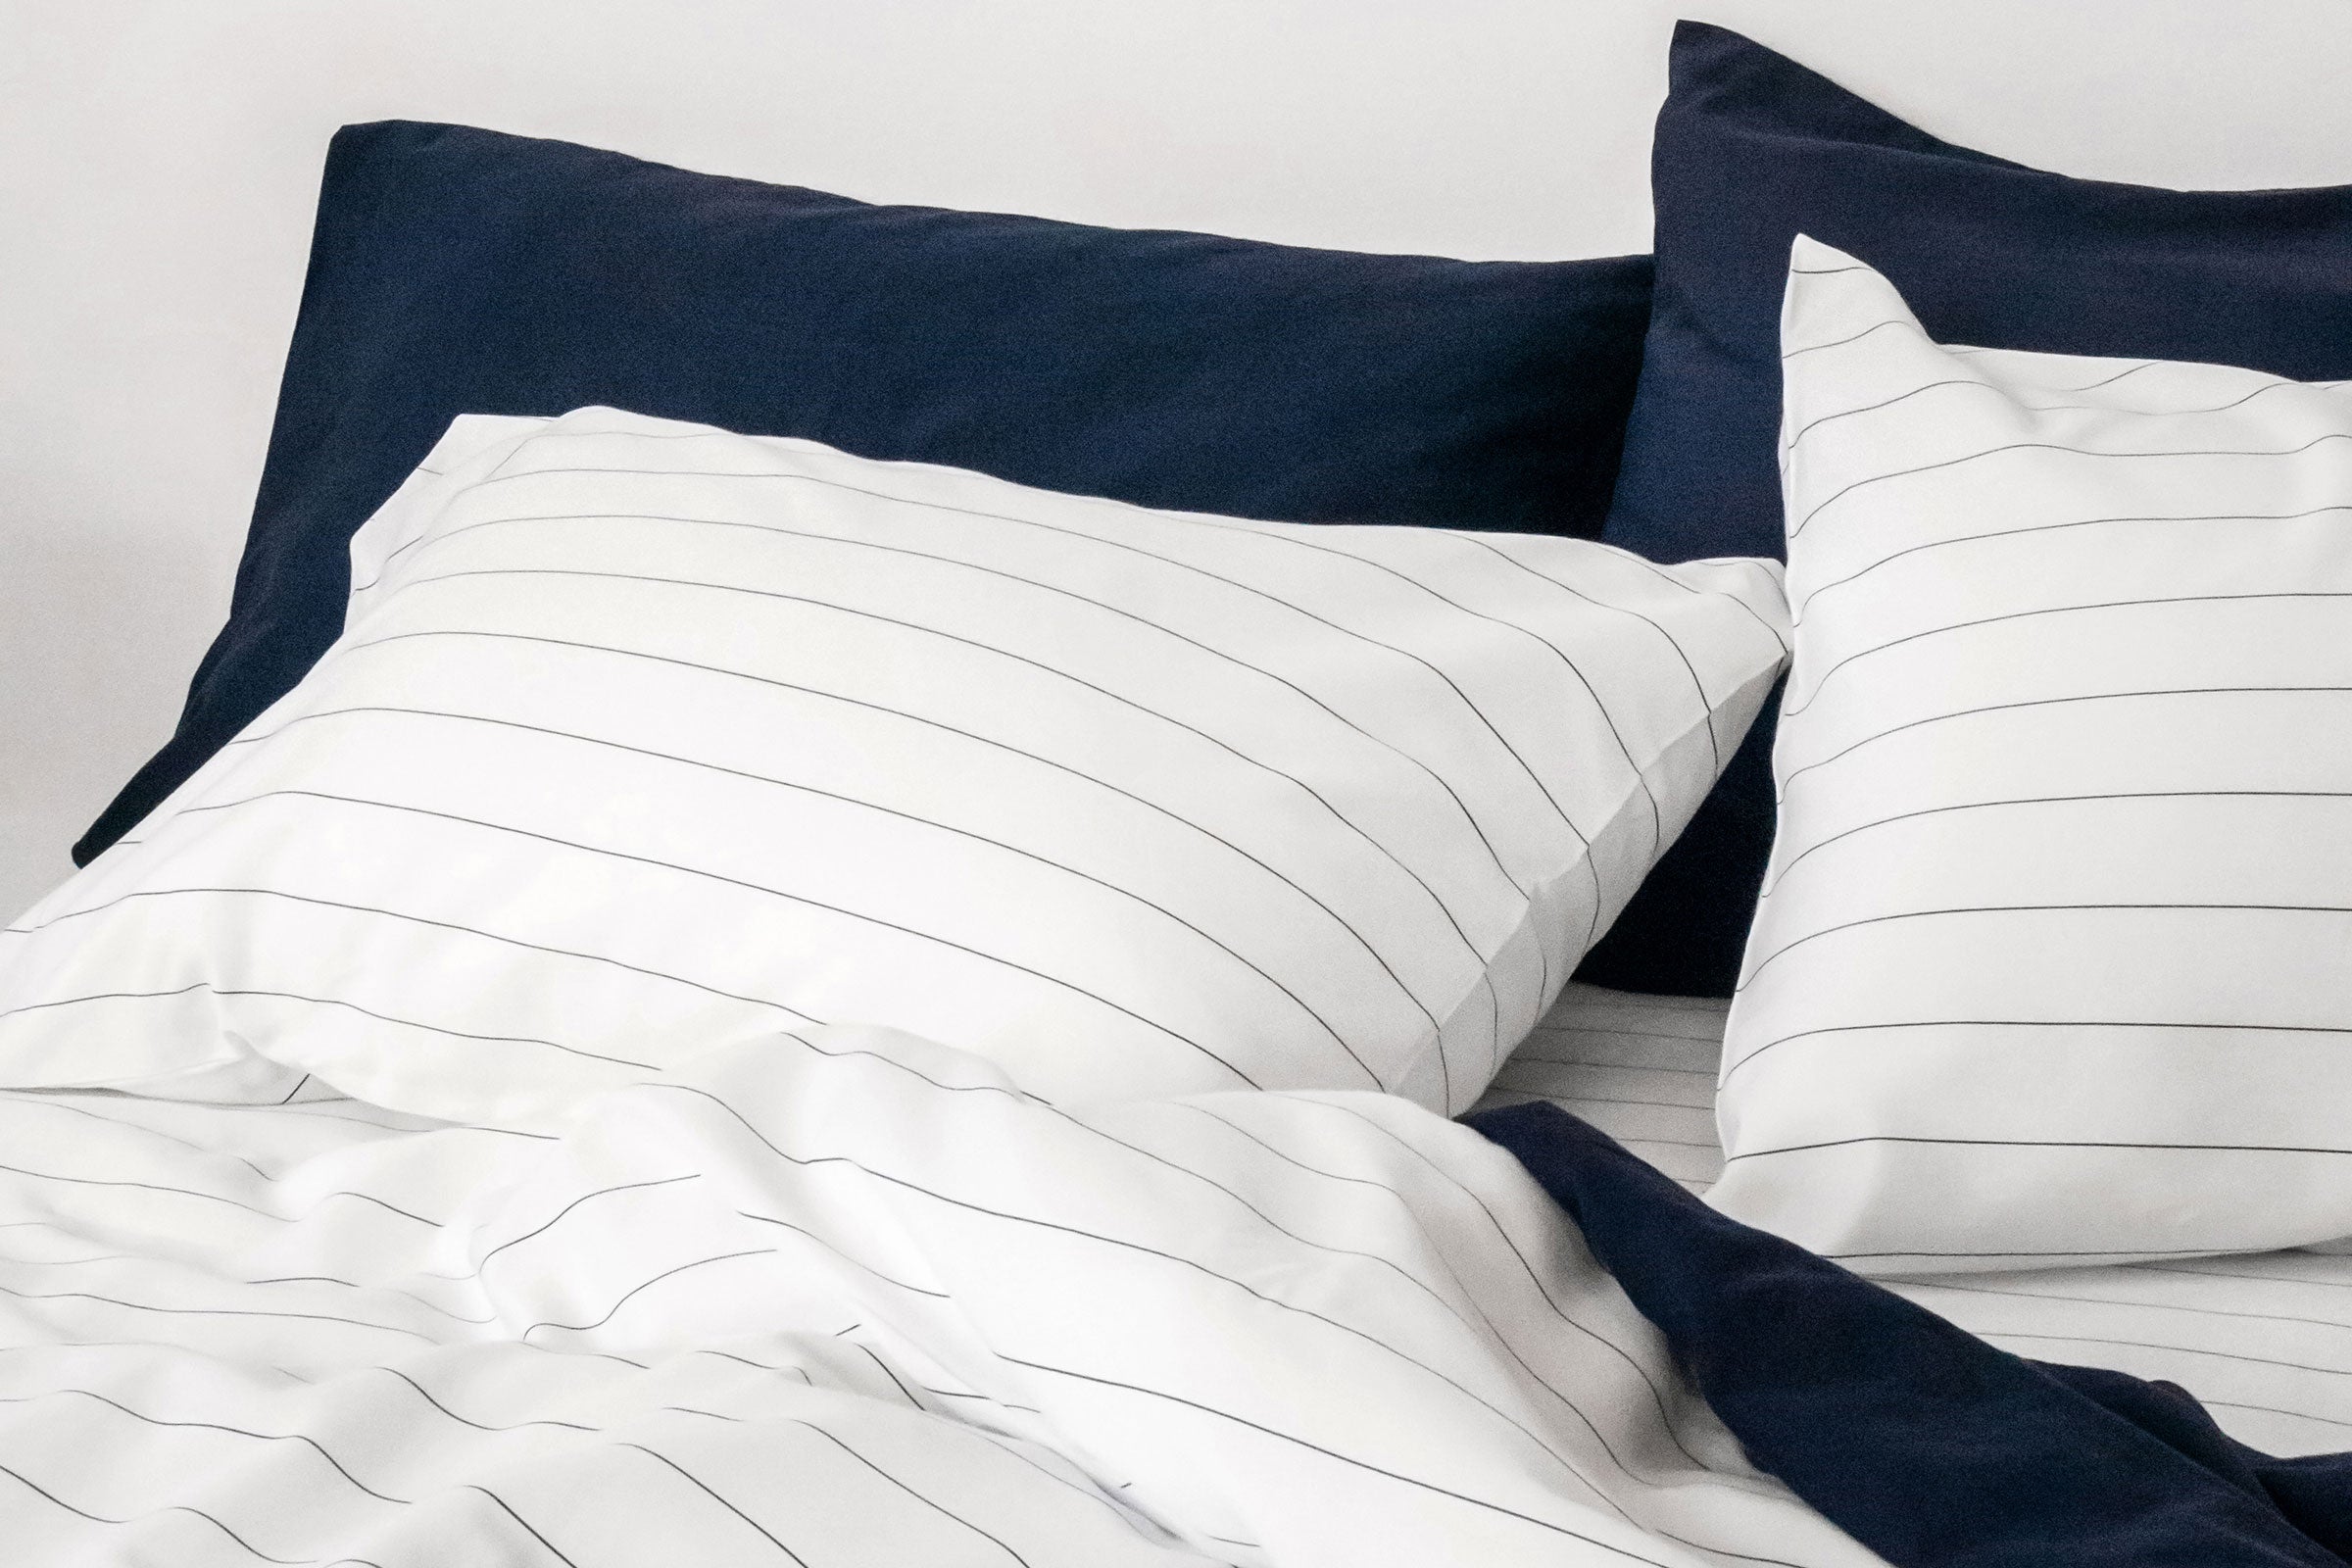 classic-pinstripes-duvet-cover-fitted-sheet-pillowcase-pair-navy-flat-sheet-pillowcase-pair-by-sojao.jpg